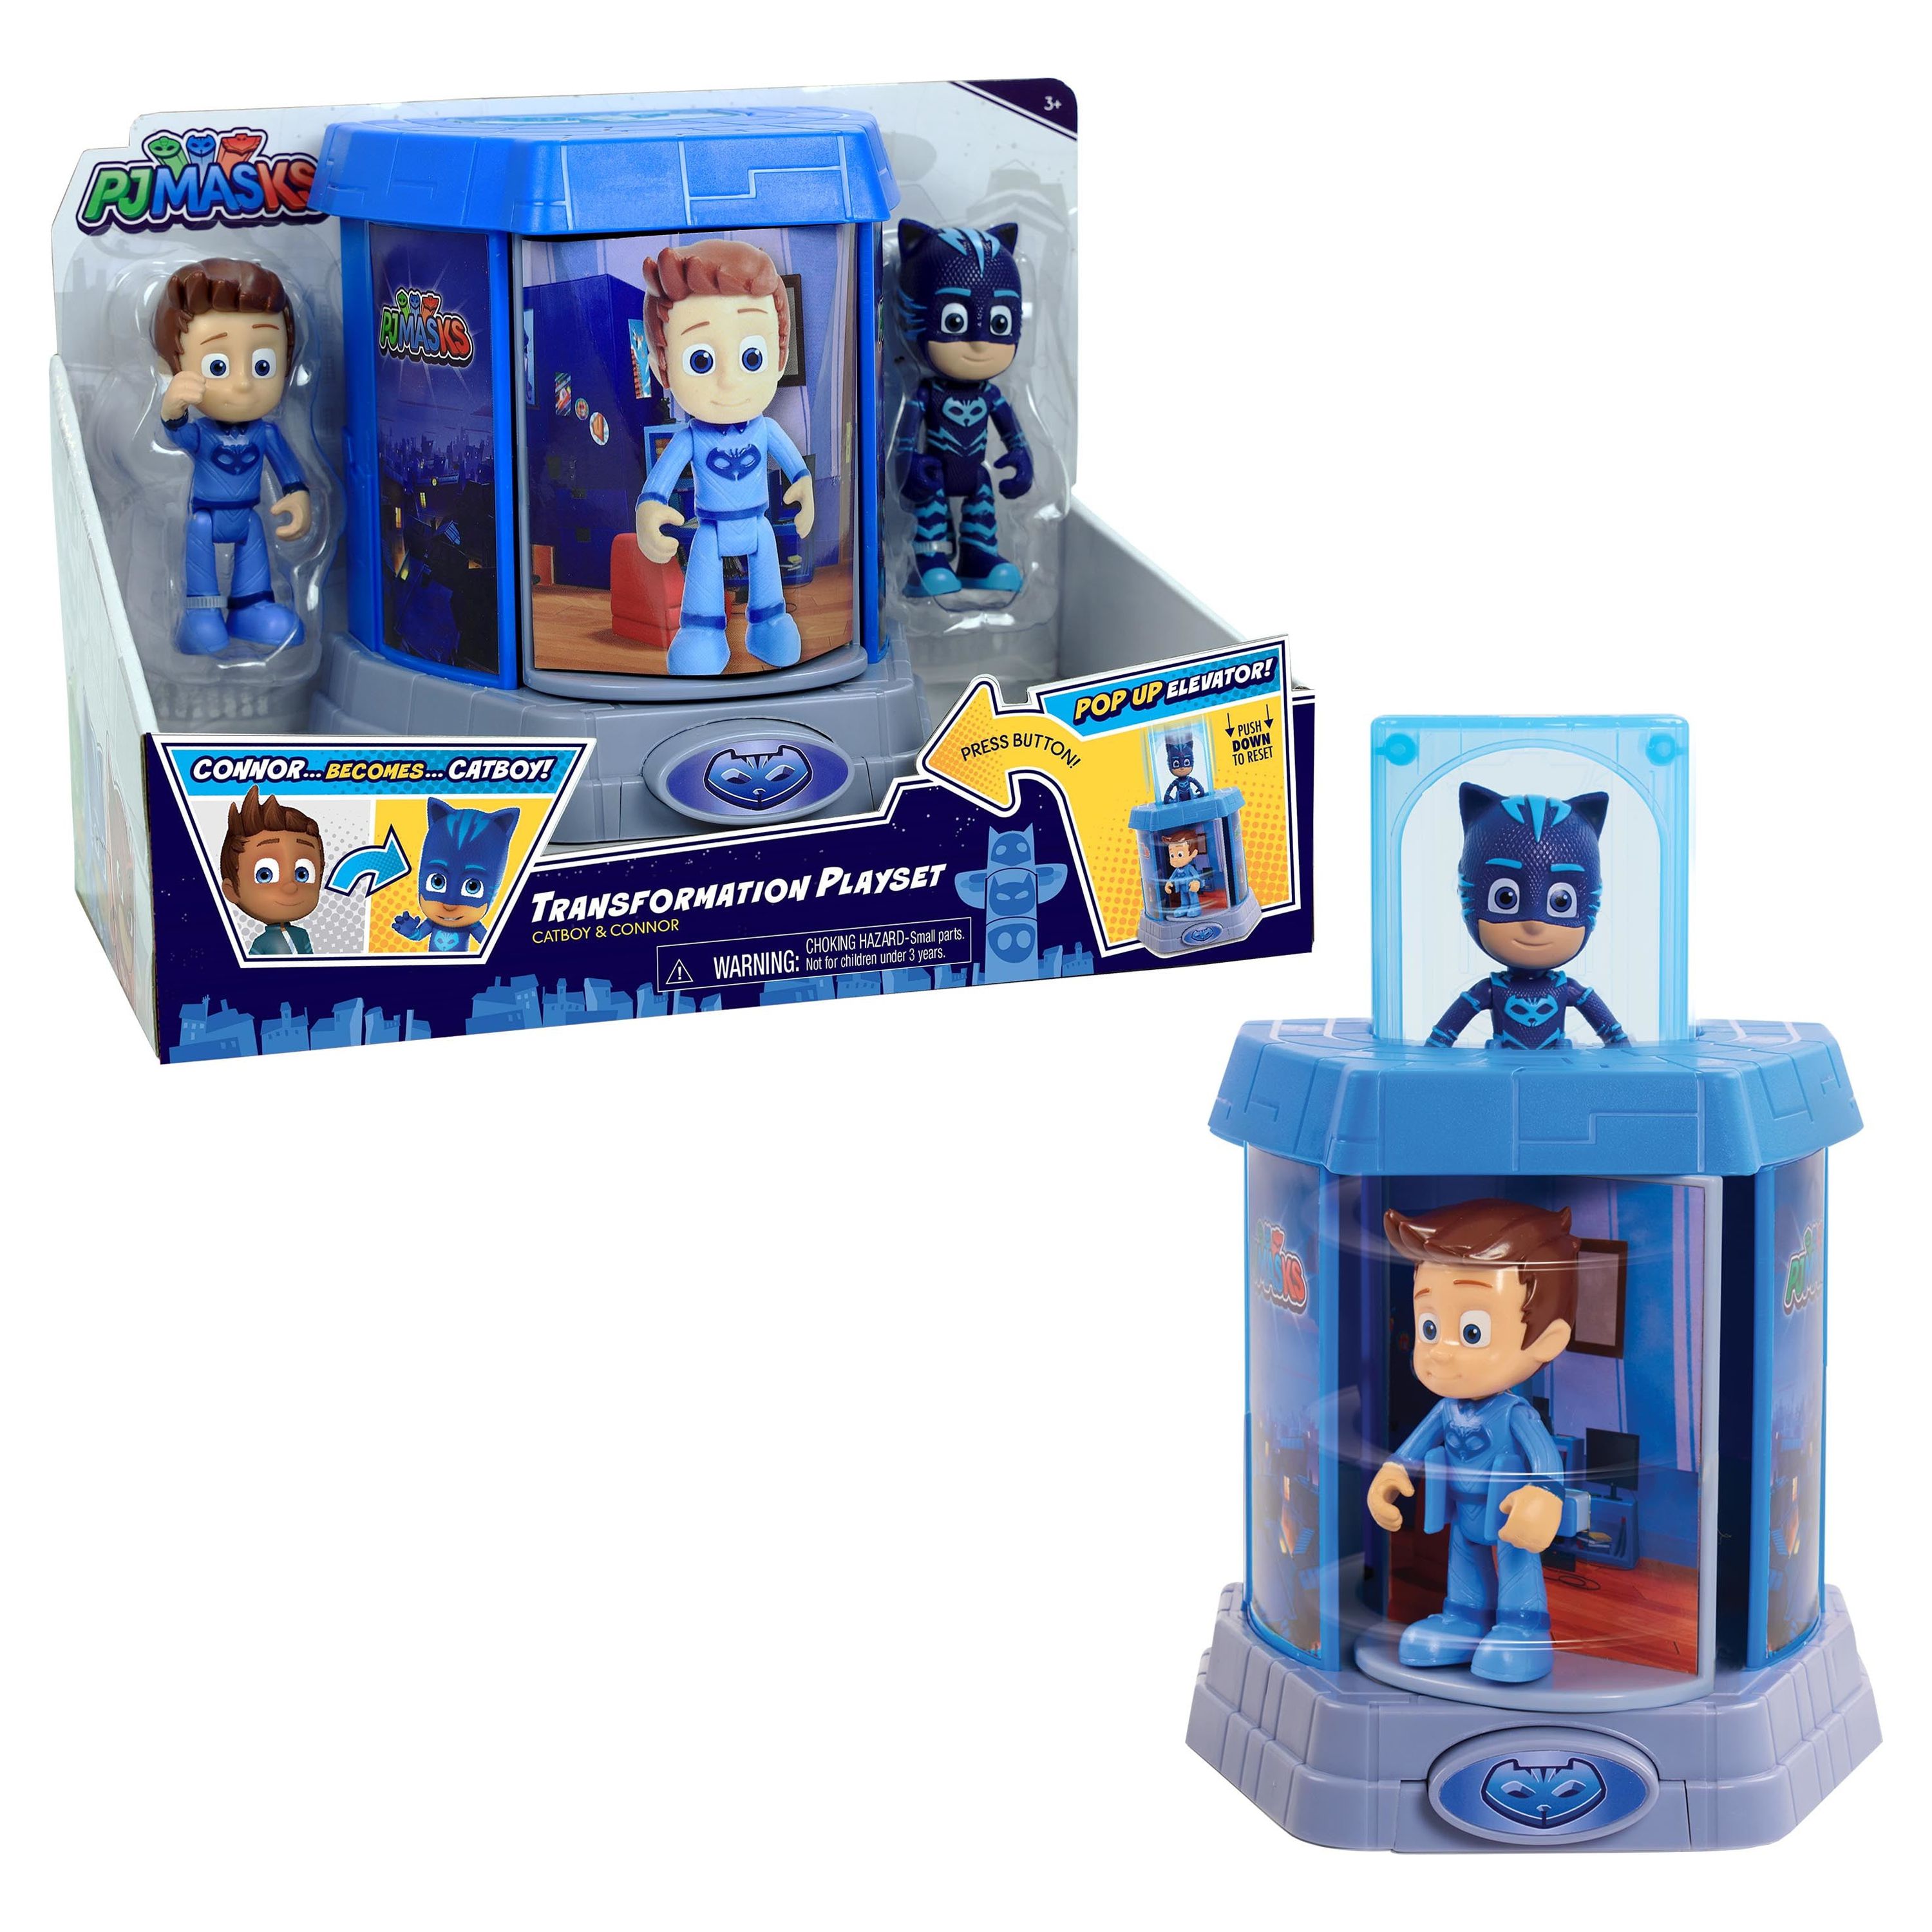 PJ Masks Transforming Figures, Catboy,  Kids Toys for Ages 3 Up, Gifts and Presents - image 1 of 4